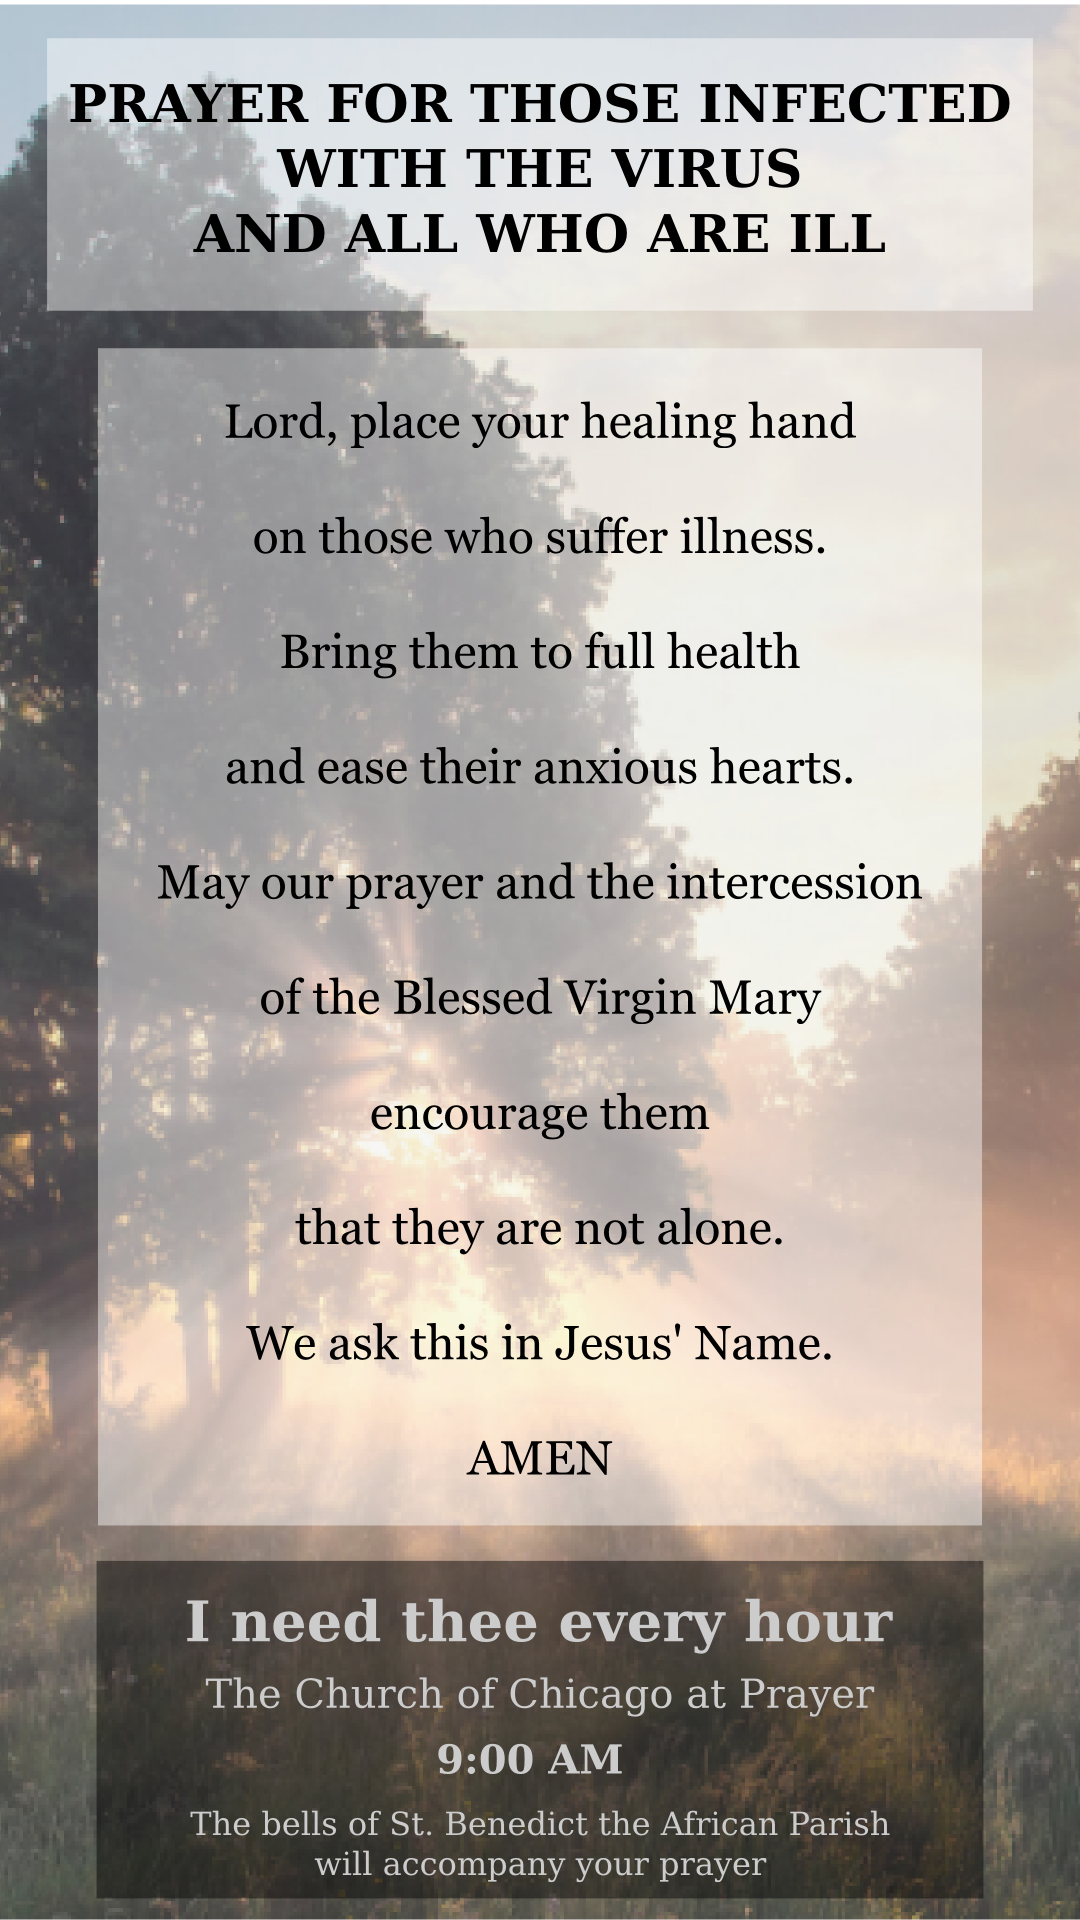 Prayer card for those infected with the COVID Corona virus and all who are ill